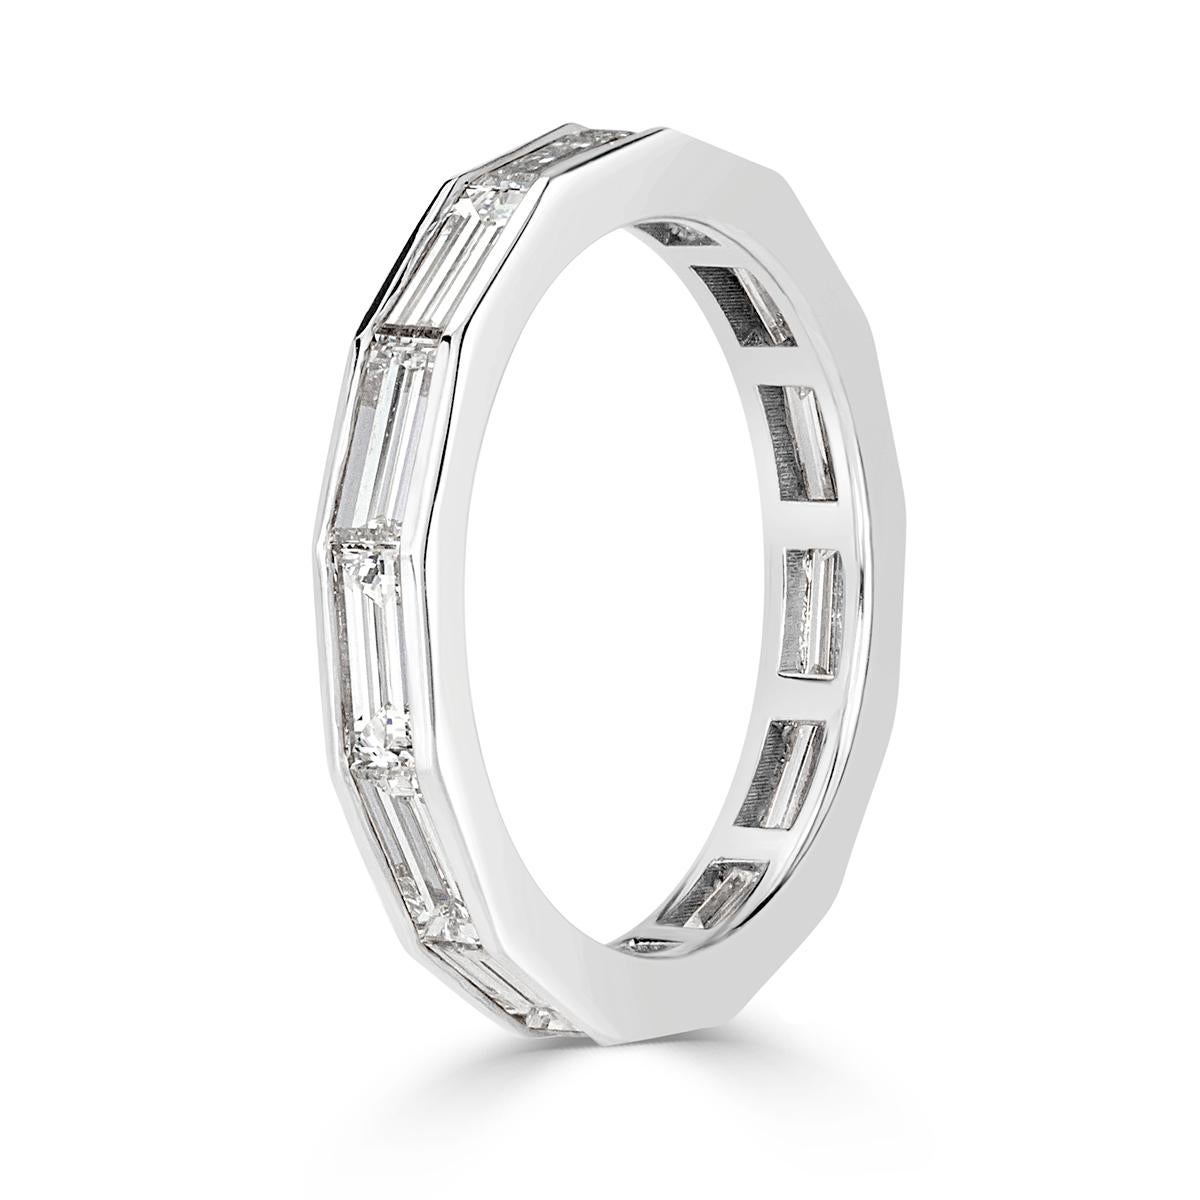 Custom designed in high polish platinum, this chic diamond eternity band showcases 2.05ct of baguette cut diamonds graded at E-F in color, VVS2-VS1 in clarity. All eternity bands are shown in a size 6.5. We custom craft each eternity band and will